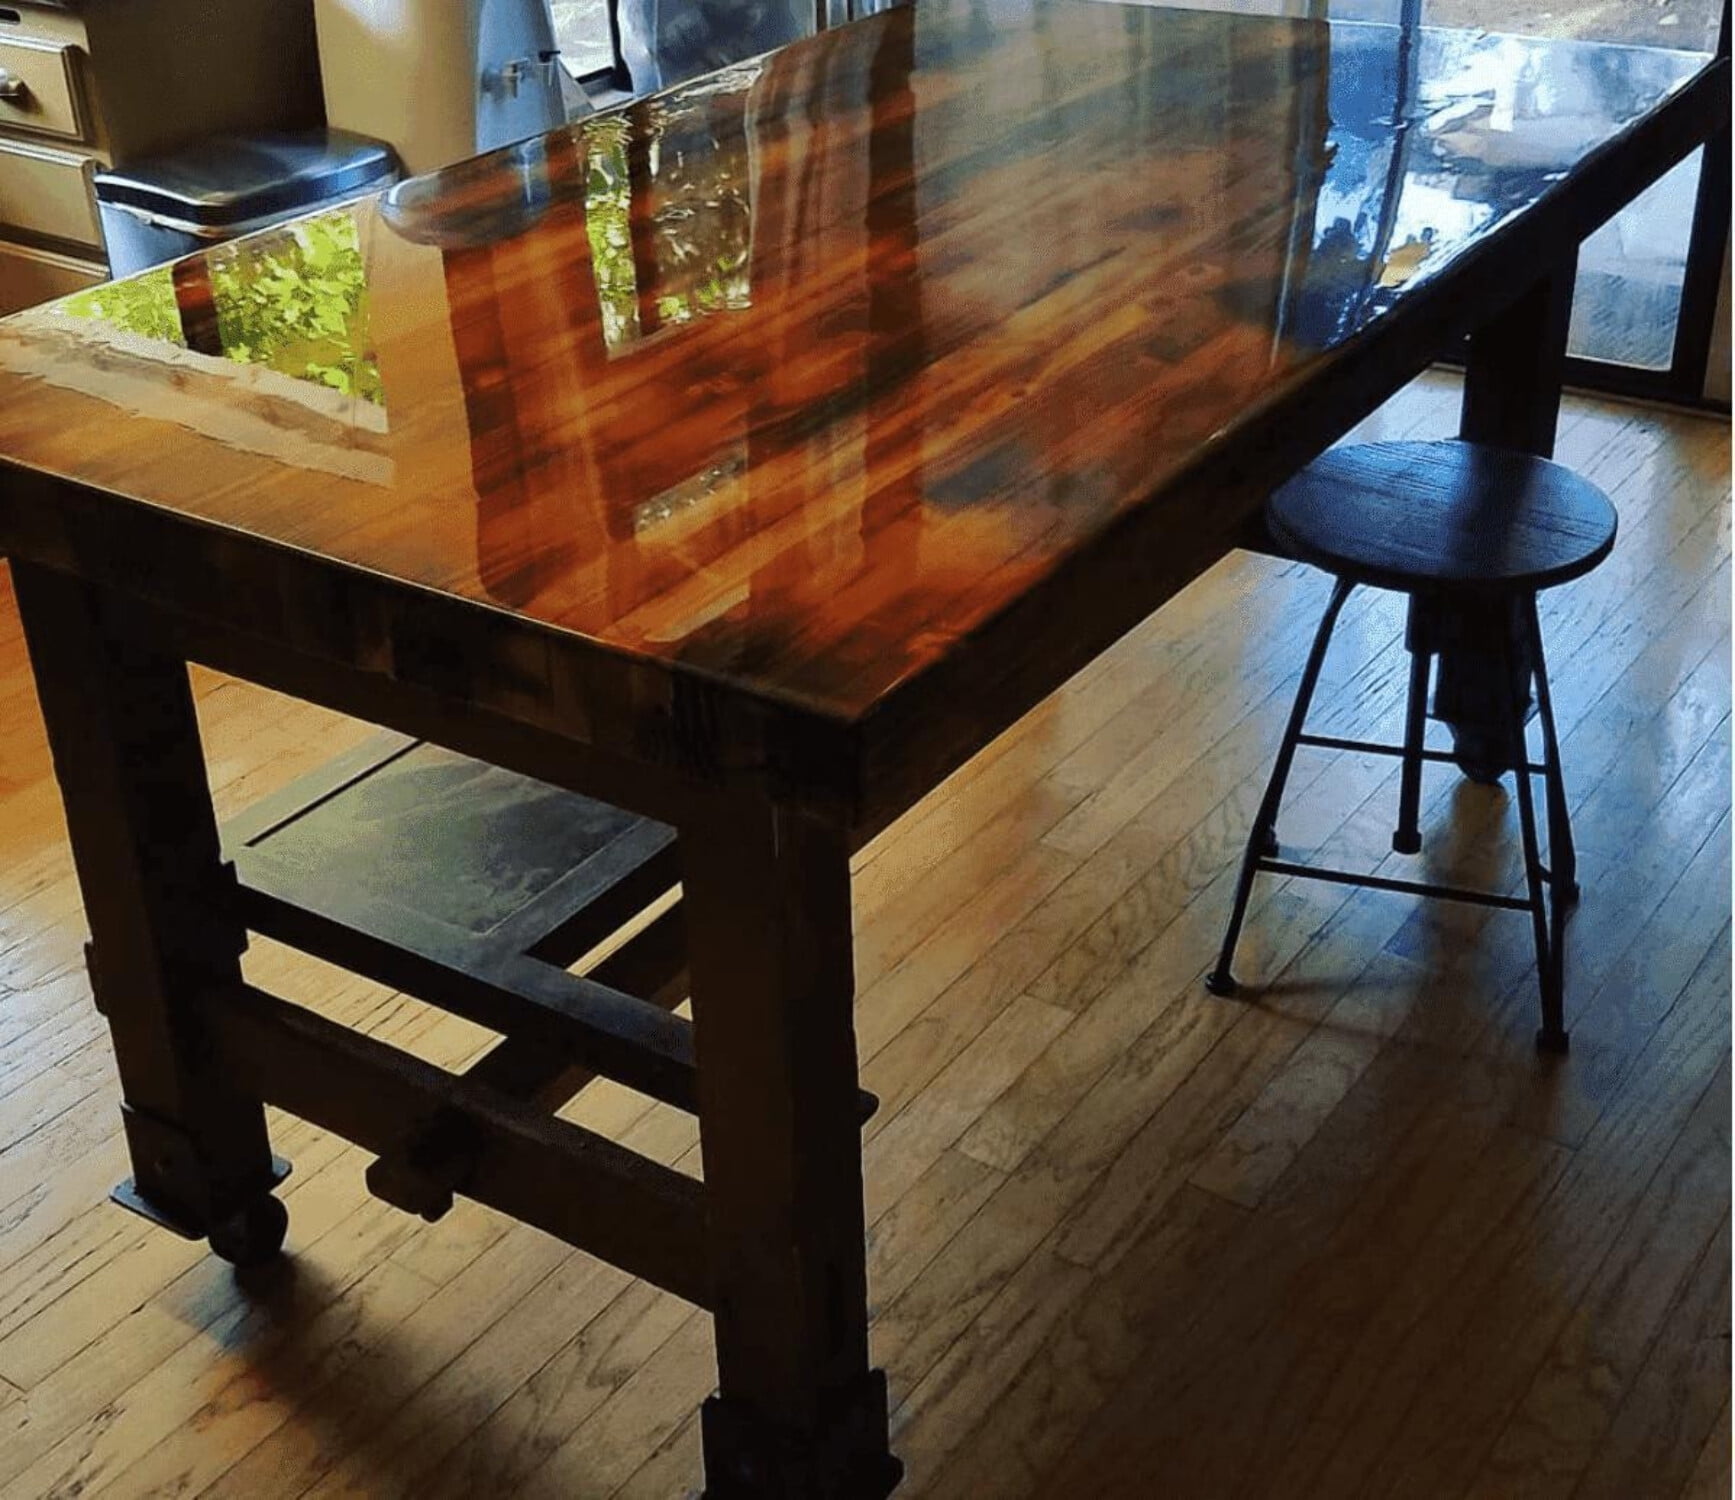 Epoxy Resin For Table Tops Guide: Tips For Using Epoxy Resin For Table Tops  – Industrial Clear